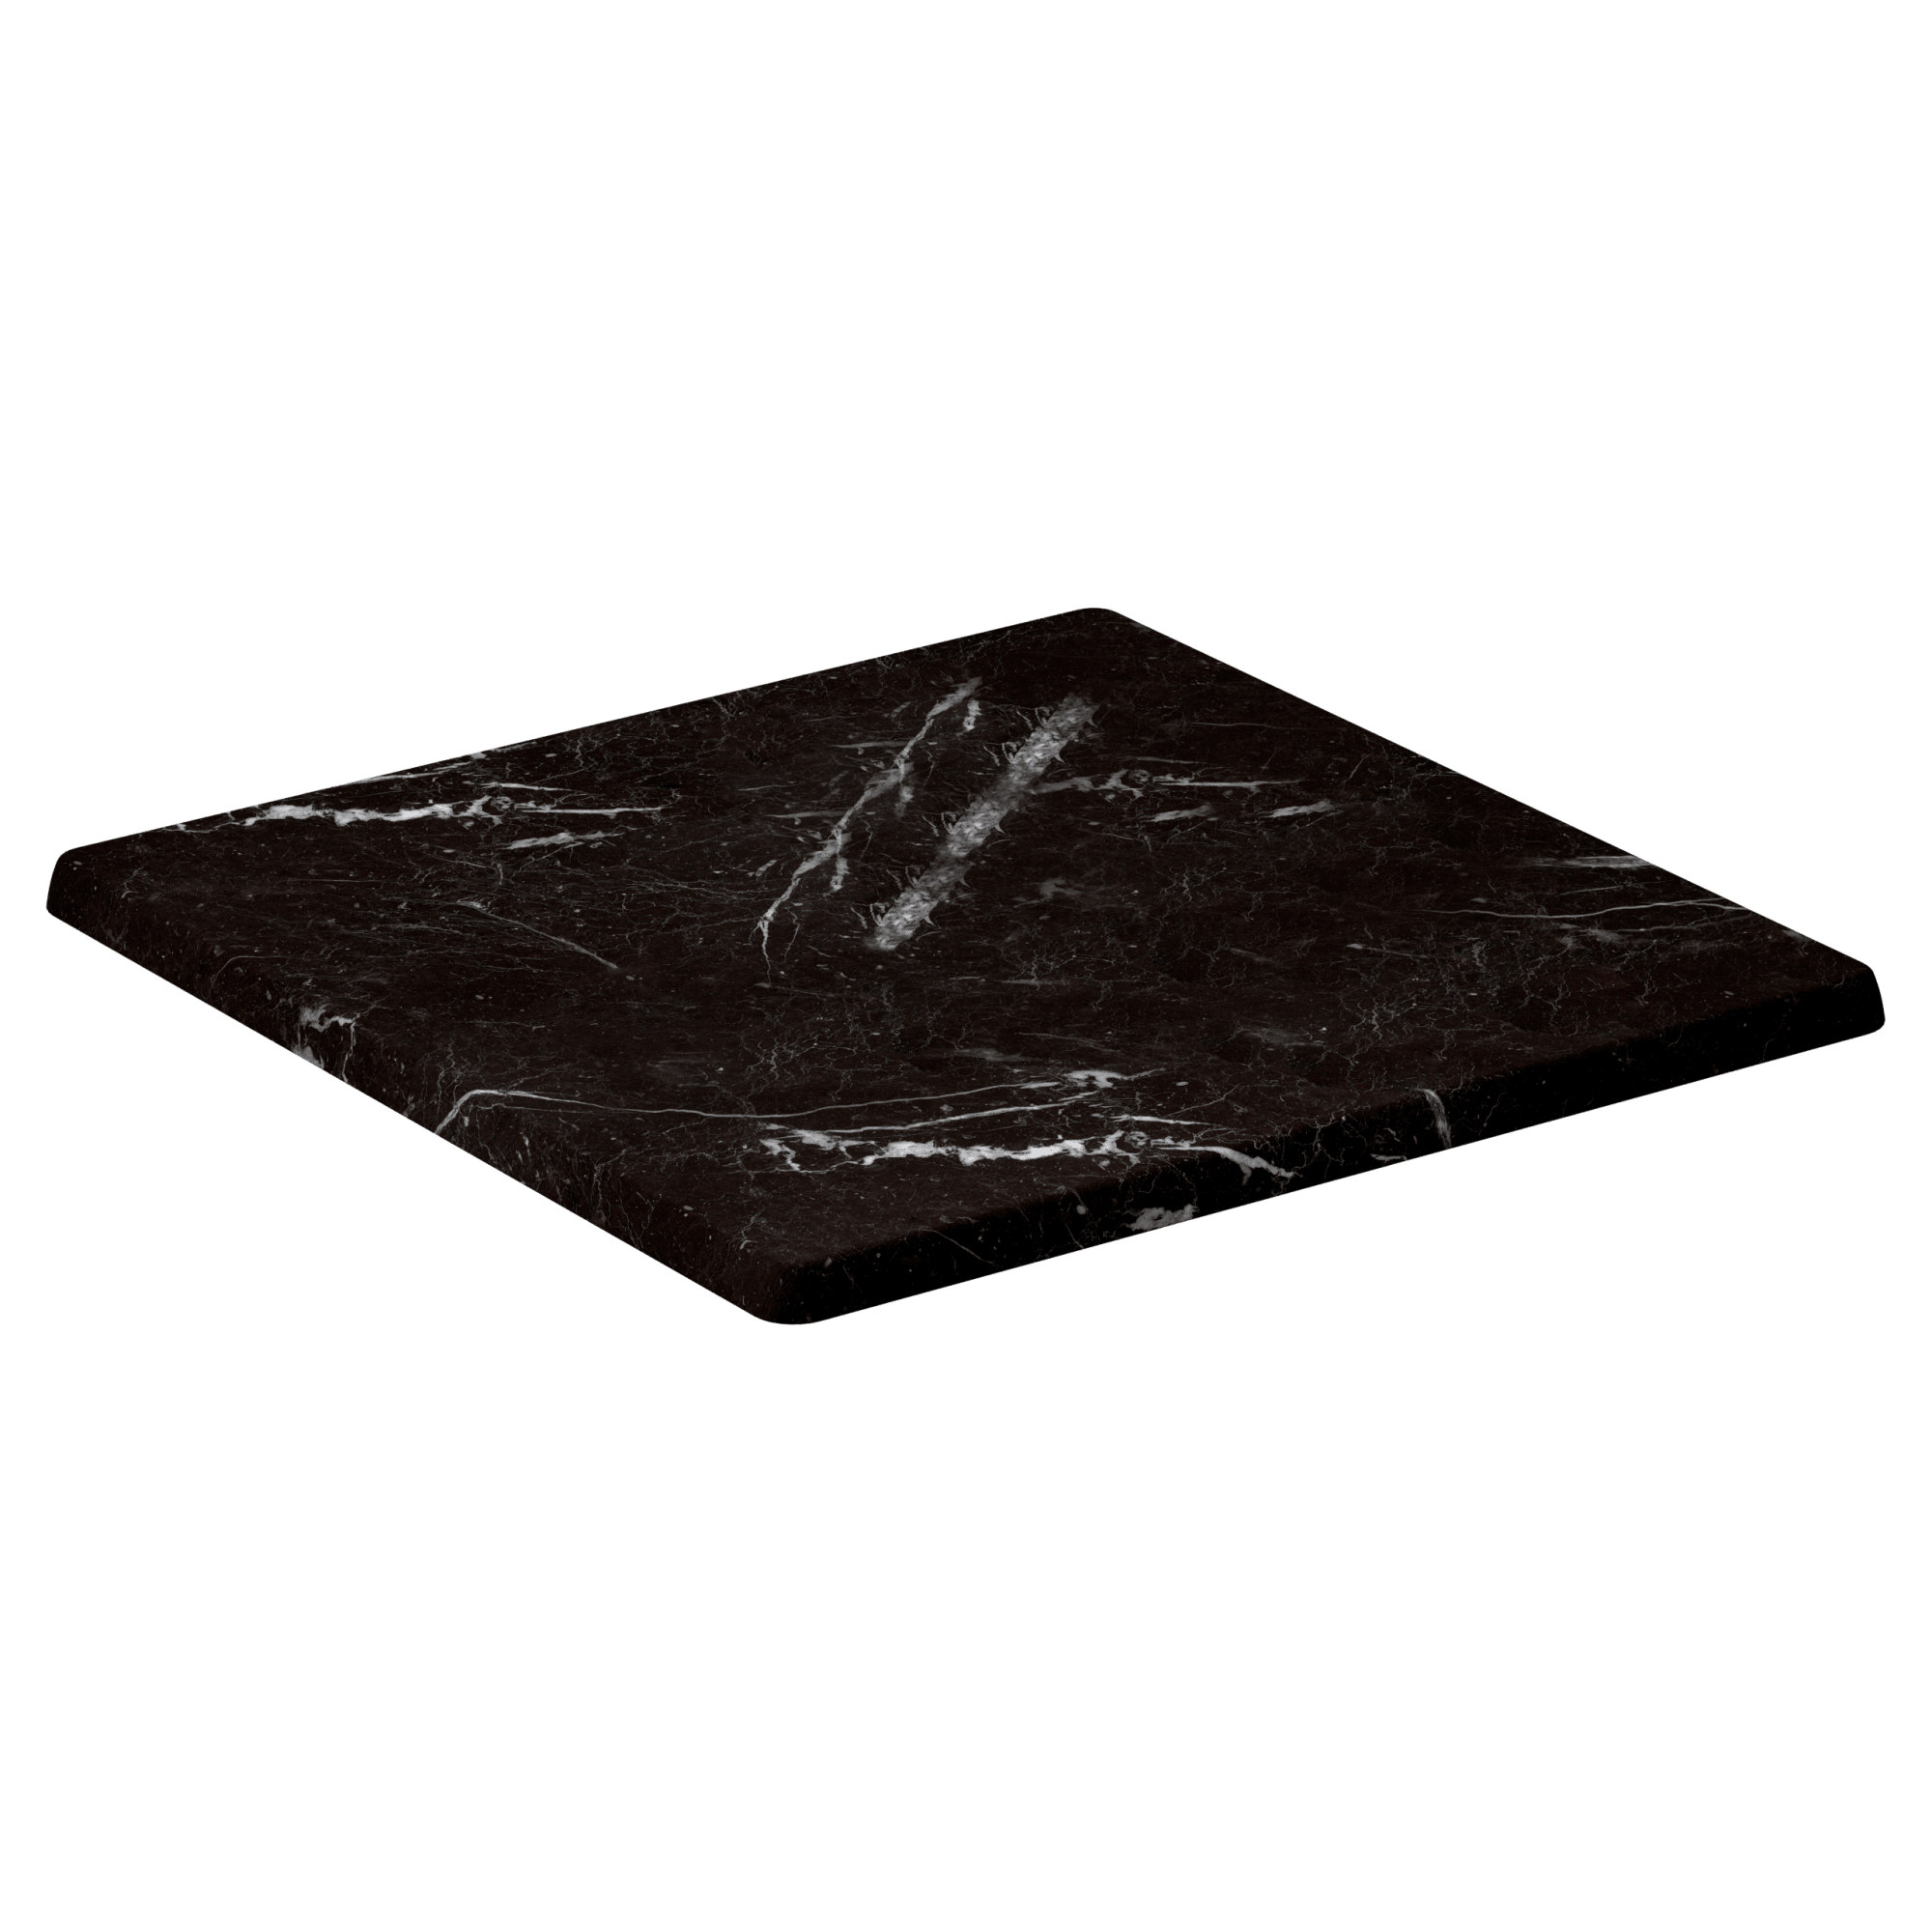 Resin Table Top in Black Marble Finish with Resin Table Top in Black Marble Finish